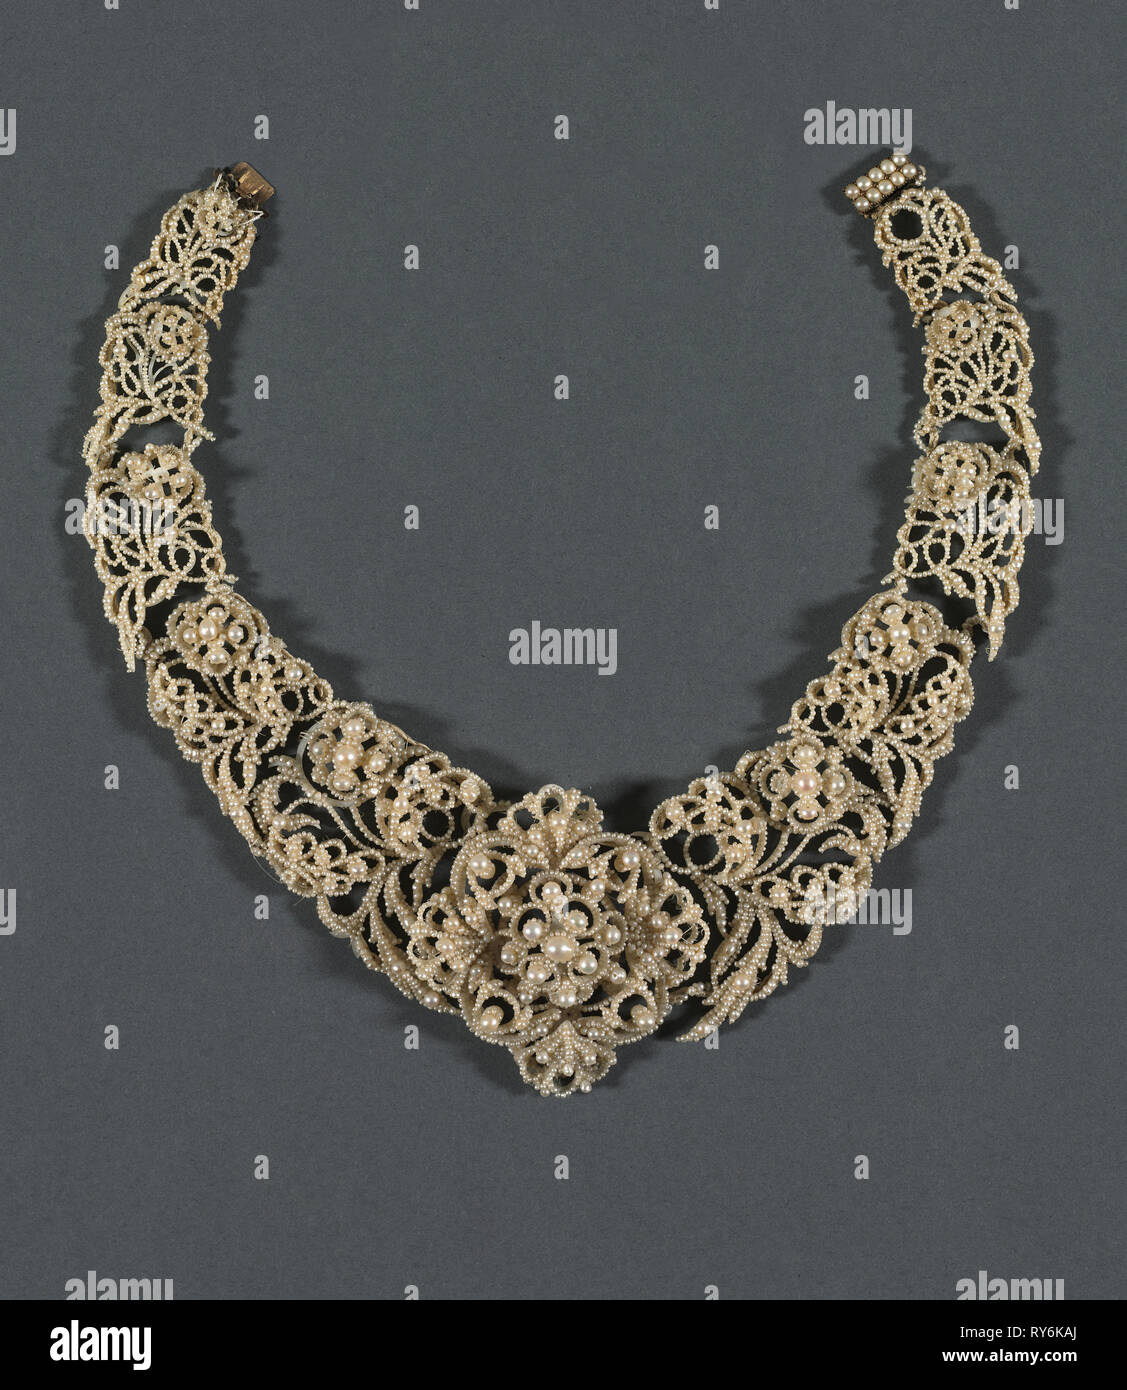 Collier Parure), ch. 1850. Angleterre, 19e siècle. Seed pearl sur nacre ;  total : 44,4 cm (17 1/2 po Photo Stock - Alamy